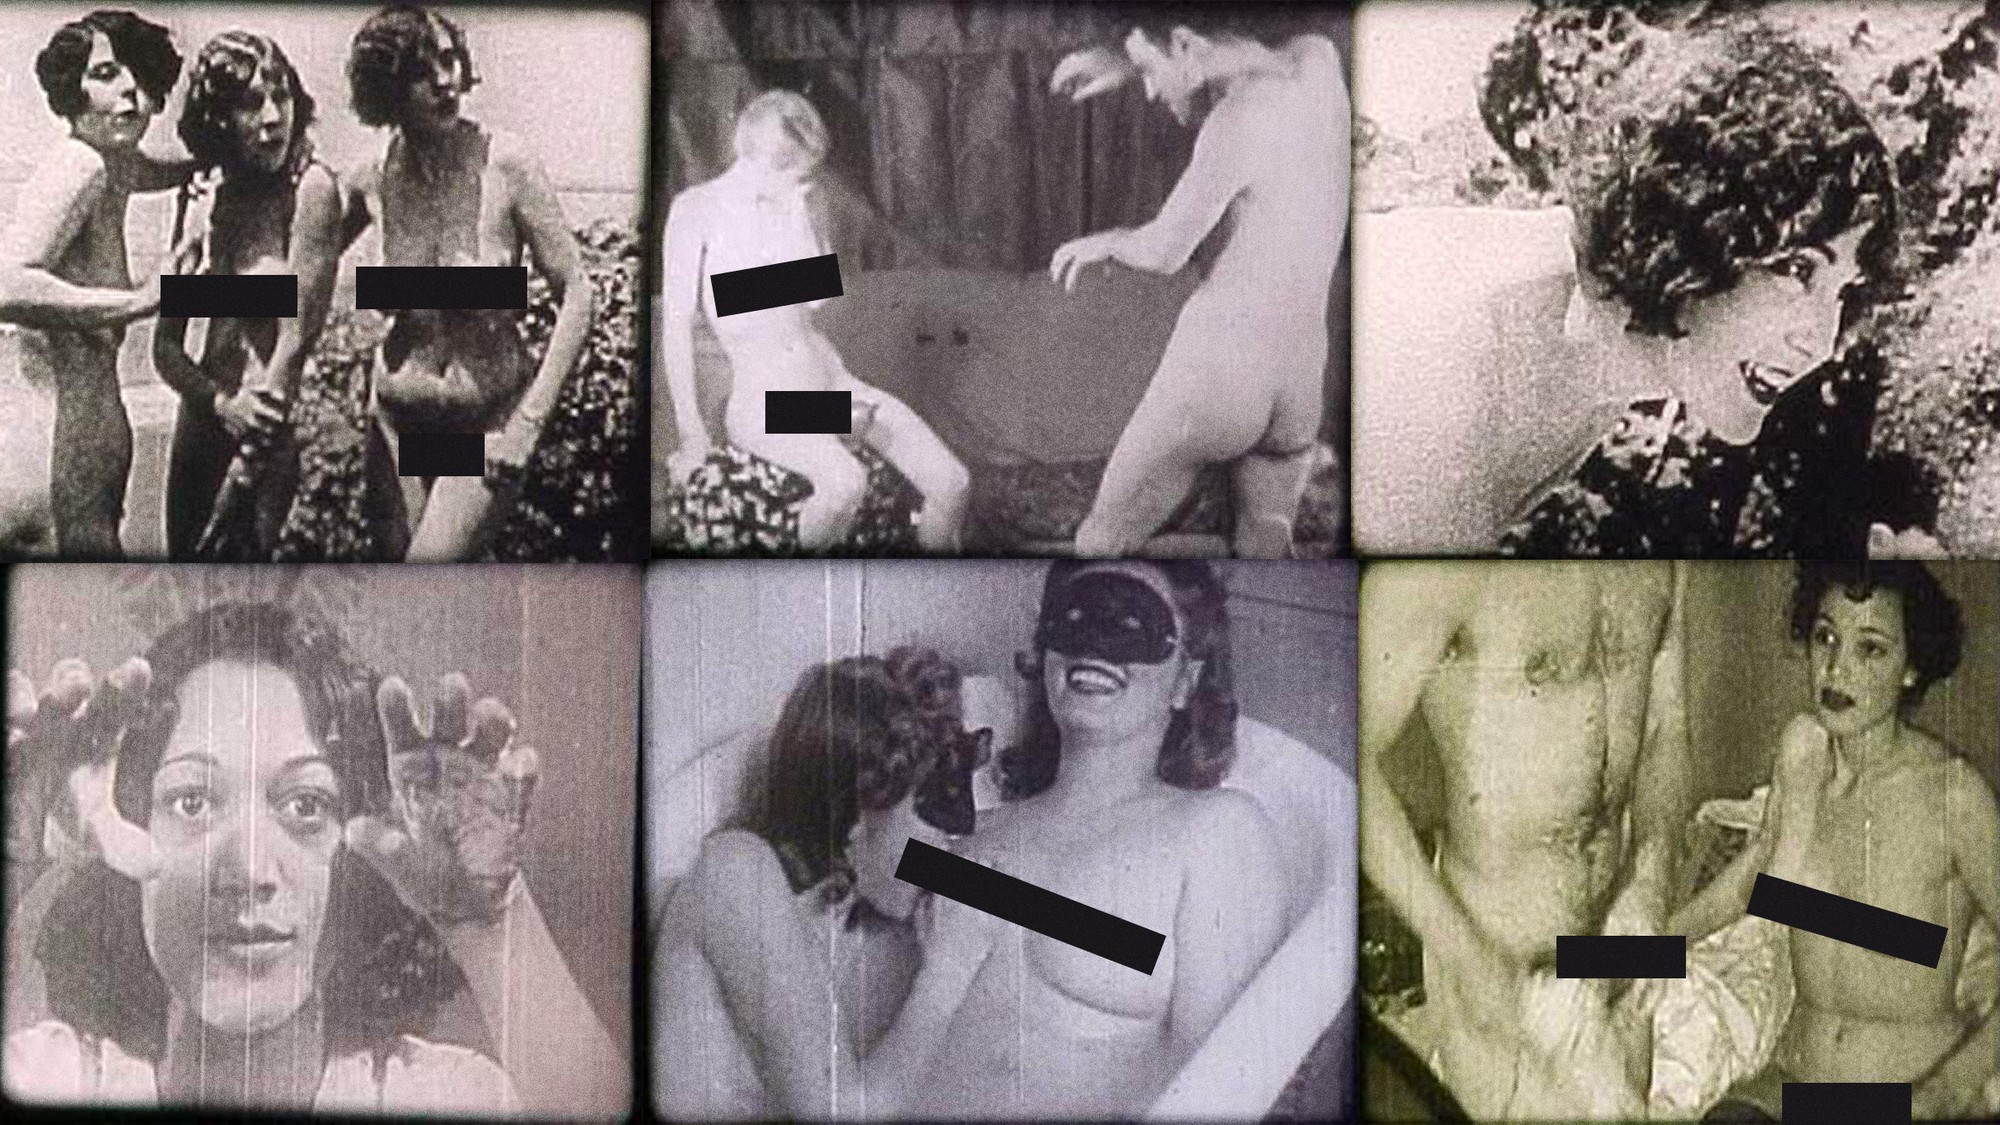 Amteur Porn Of The 70 S - Porn from the 1920s Was More Wild and Hardcore Than You ...